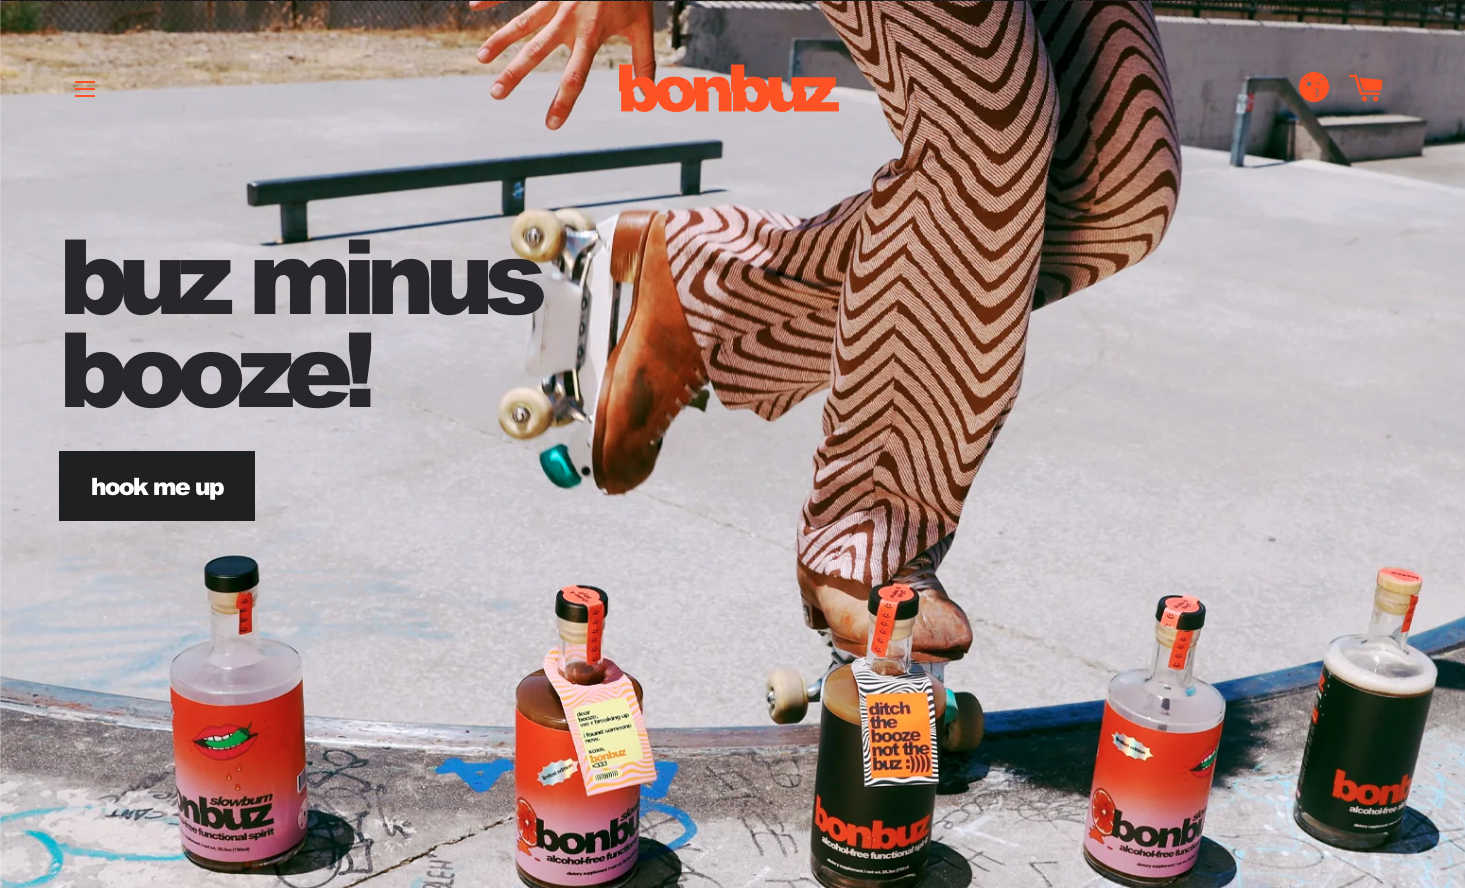 Background hero image of someone roller skating in orange and brown, wavey patterned, trousers. Bonbuz drinks bottles on floor in front of rollerskater. Large text on right hand side 'buz minu booze!'; clearly a non-alcoholic drinks ecommerce brand.